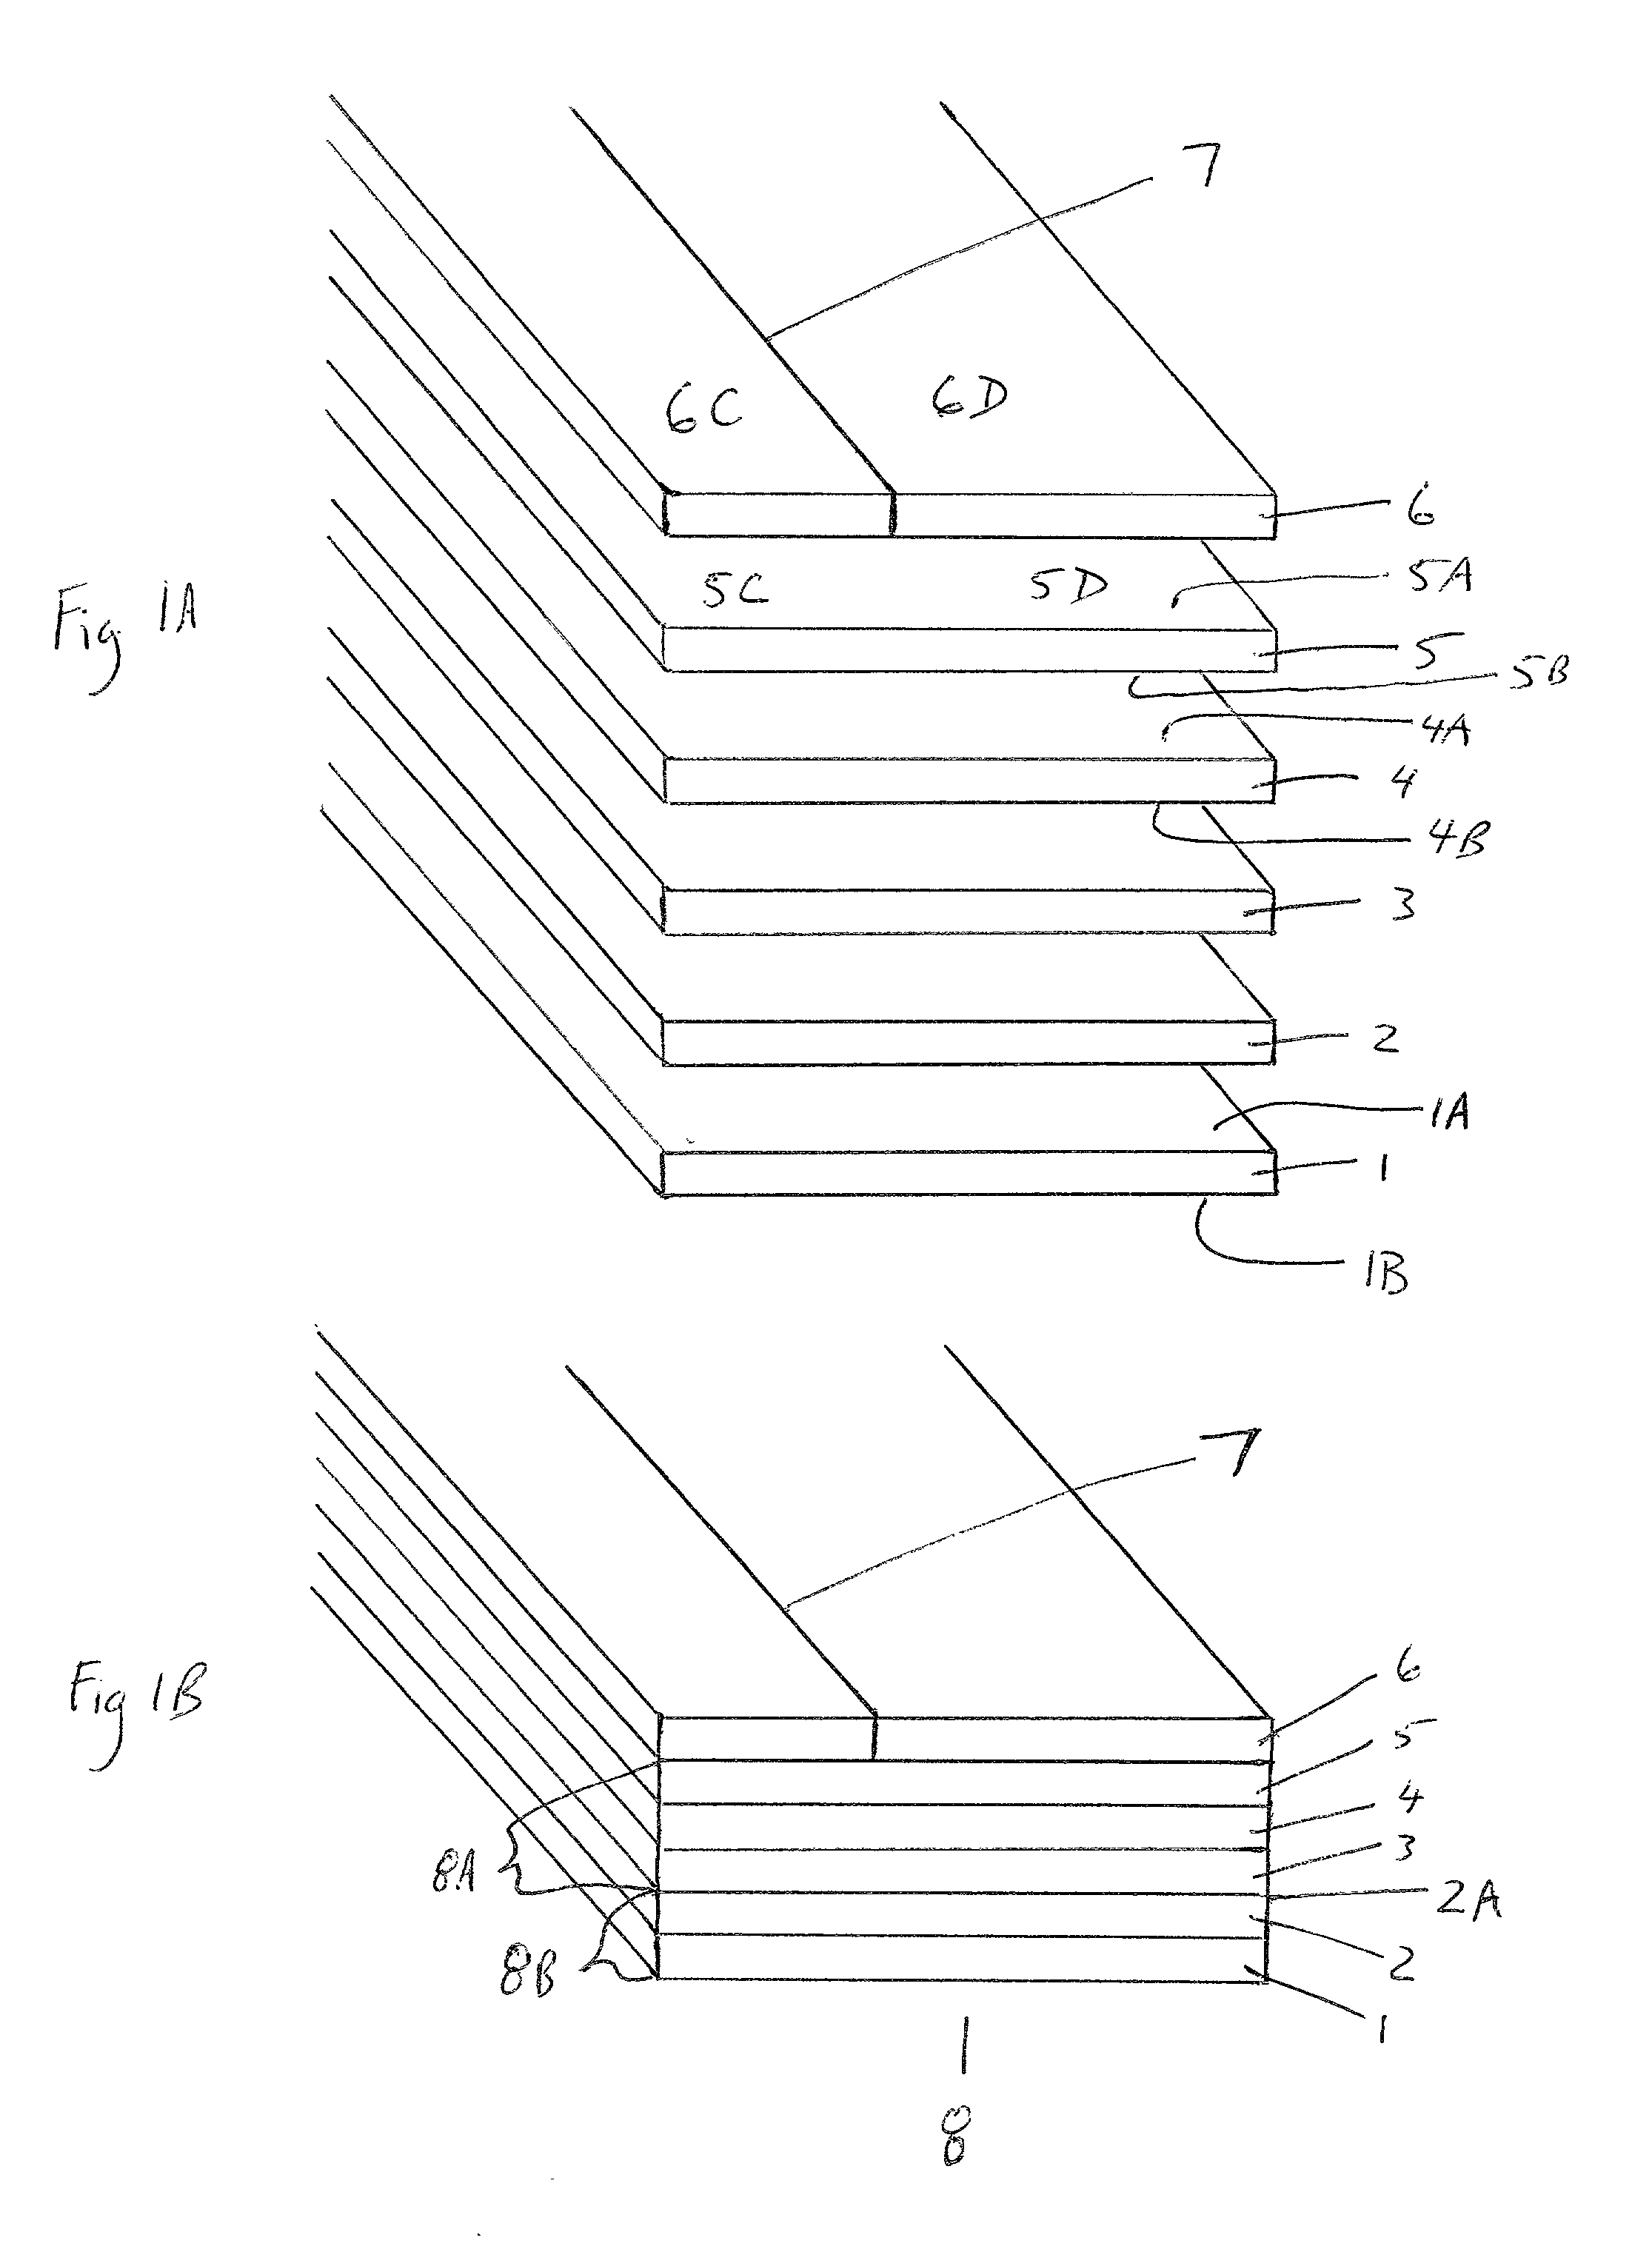 High-speed web-splicing tape and method of use thereof